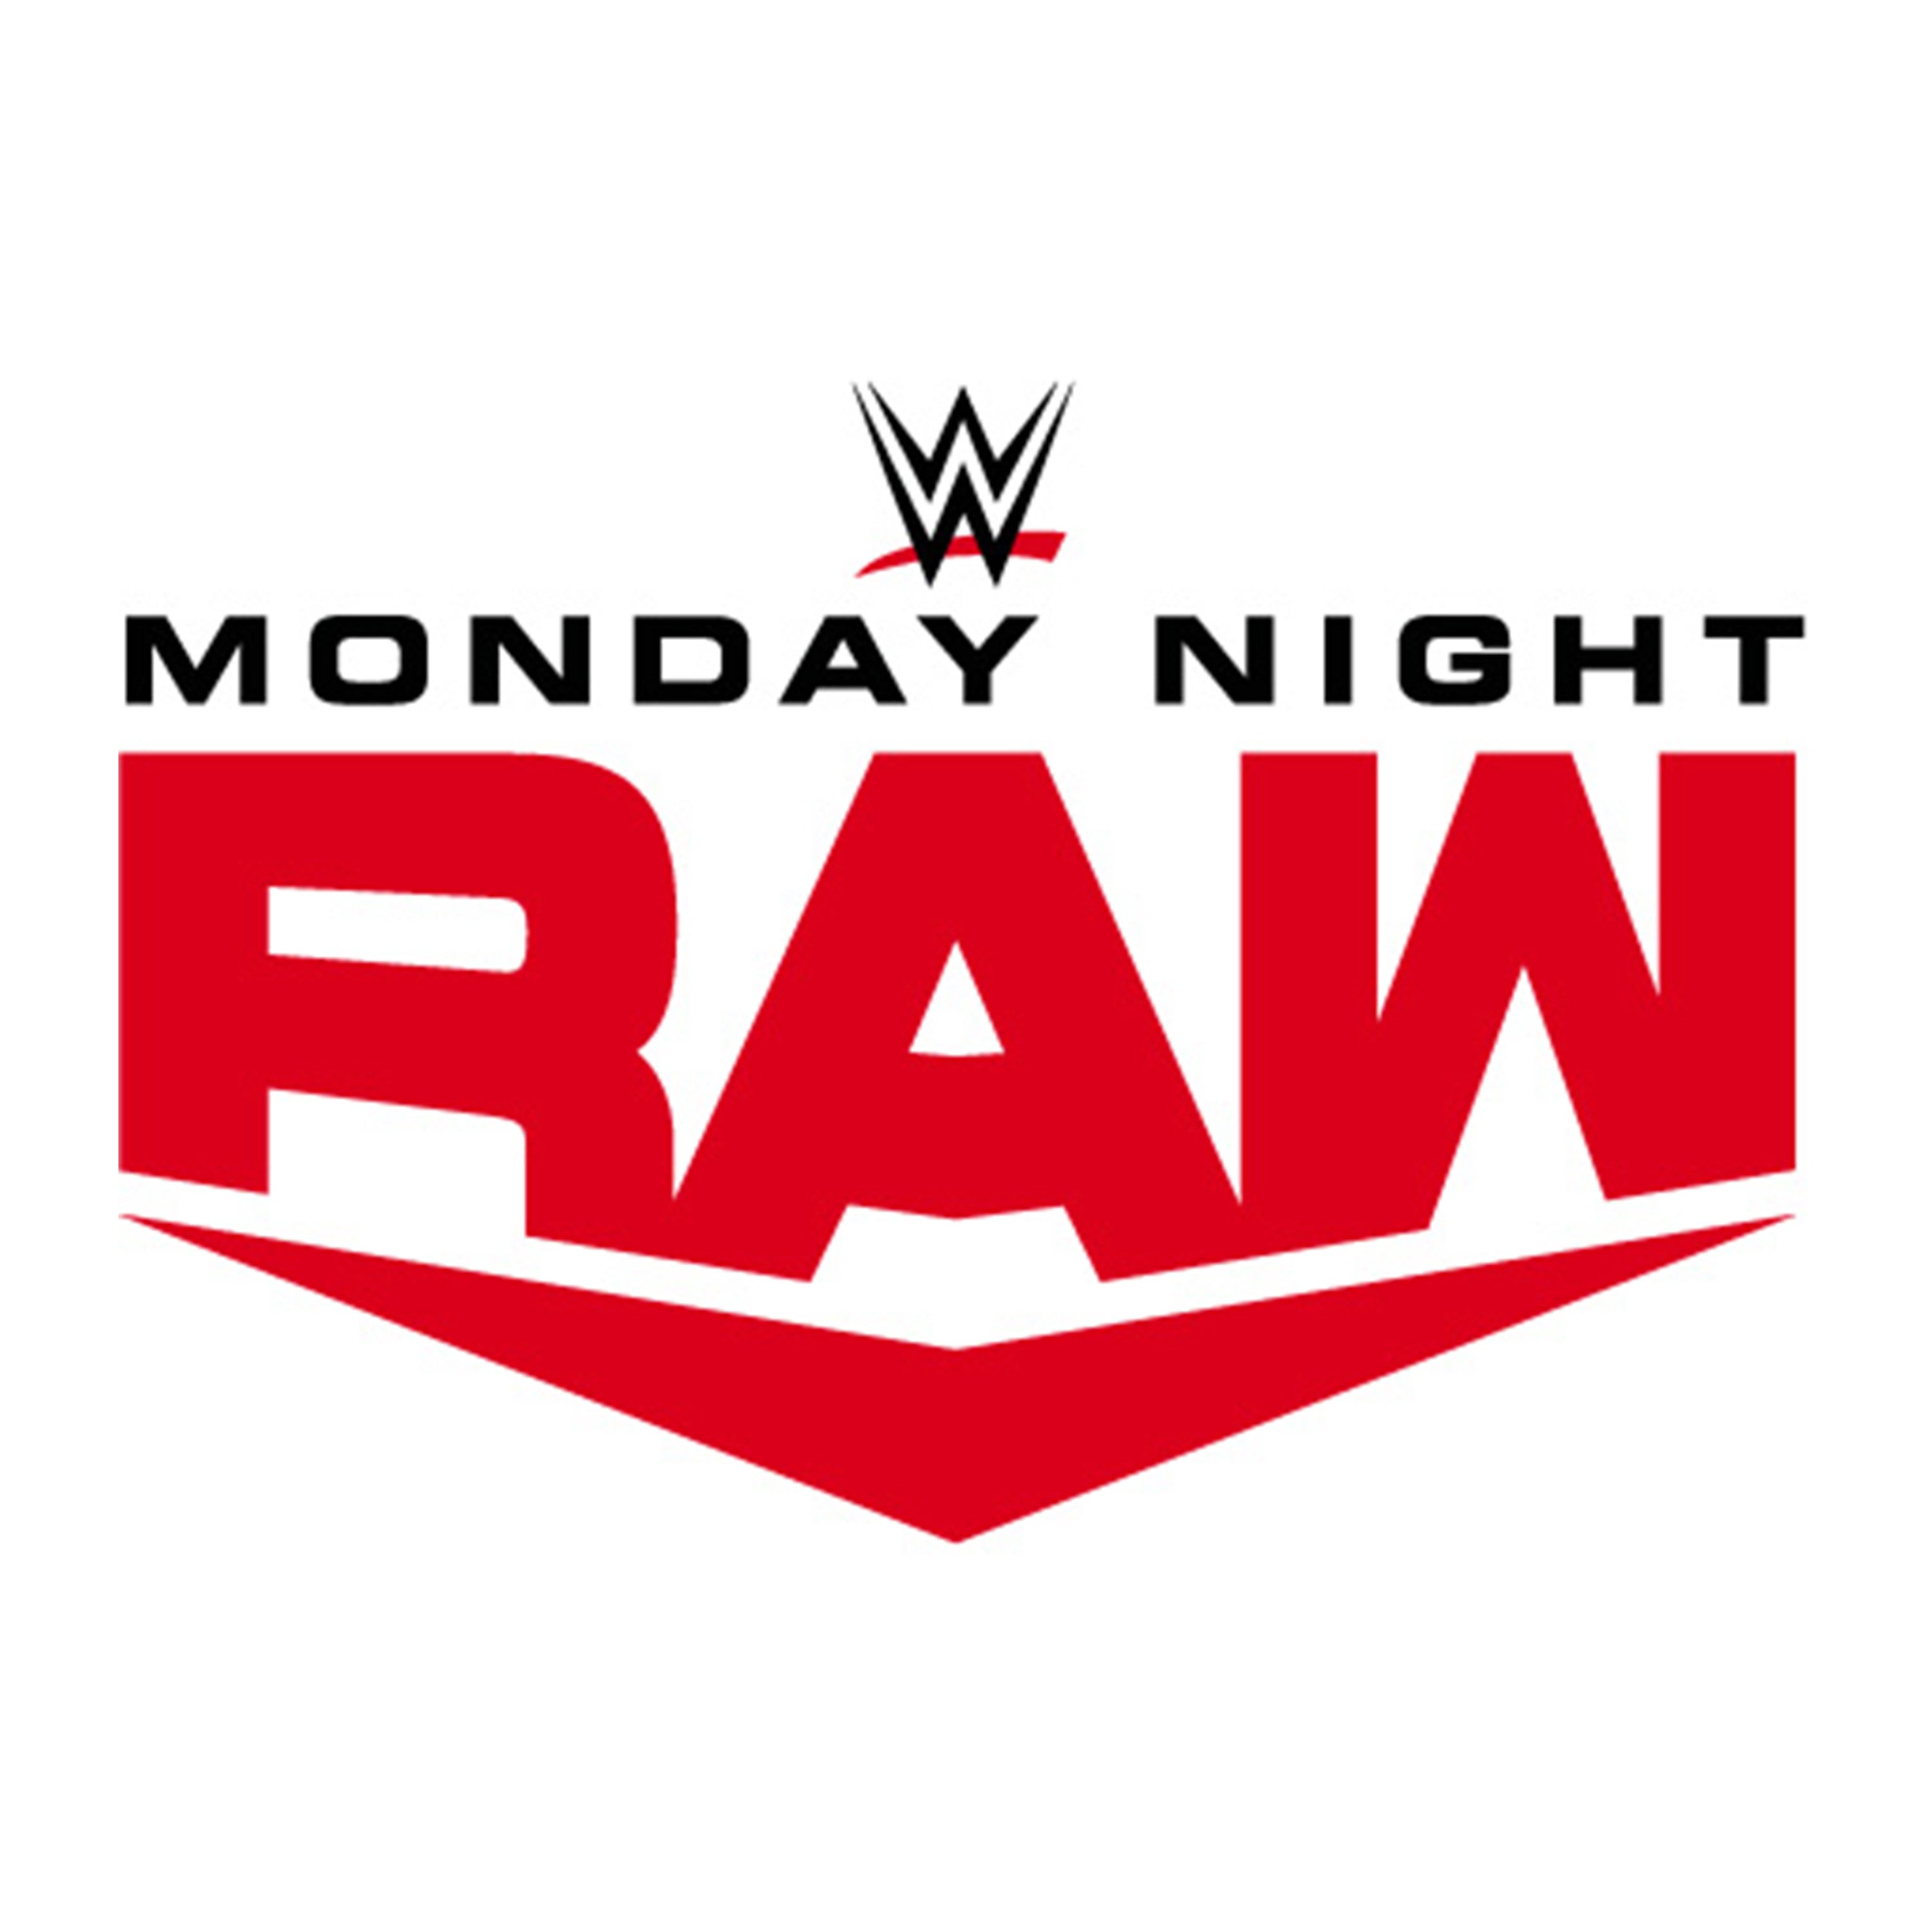 Wwe Monday Night Raw Vip Angel Of The Winds Arena